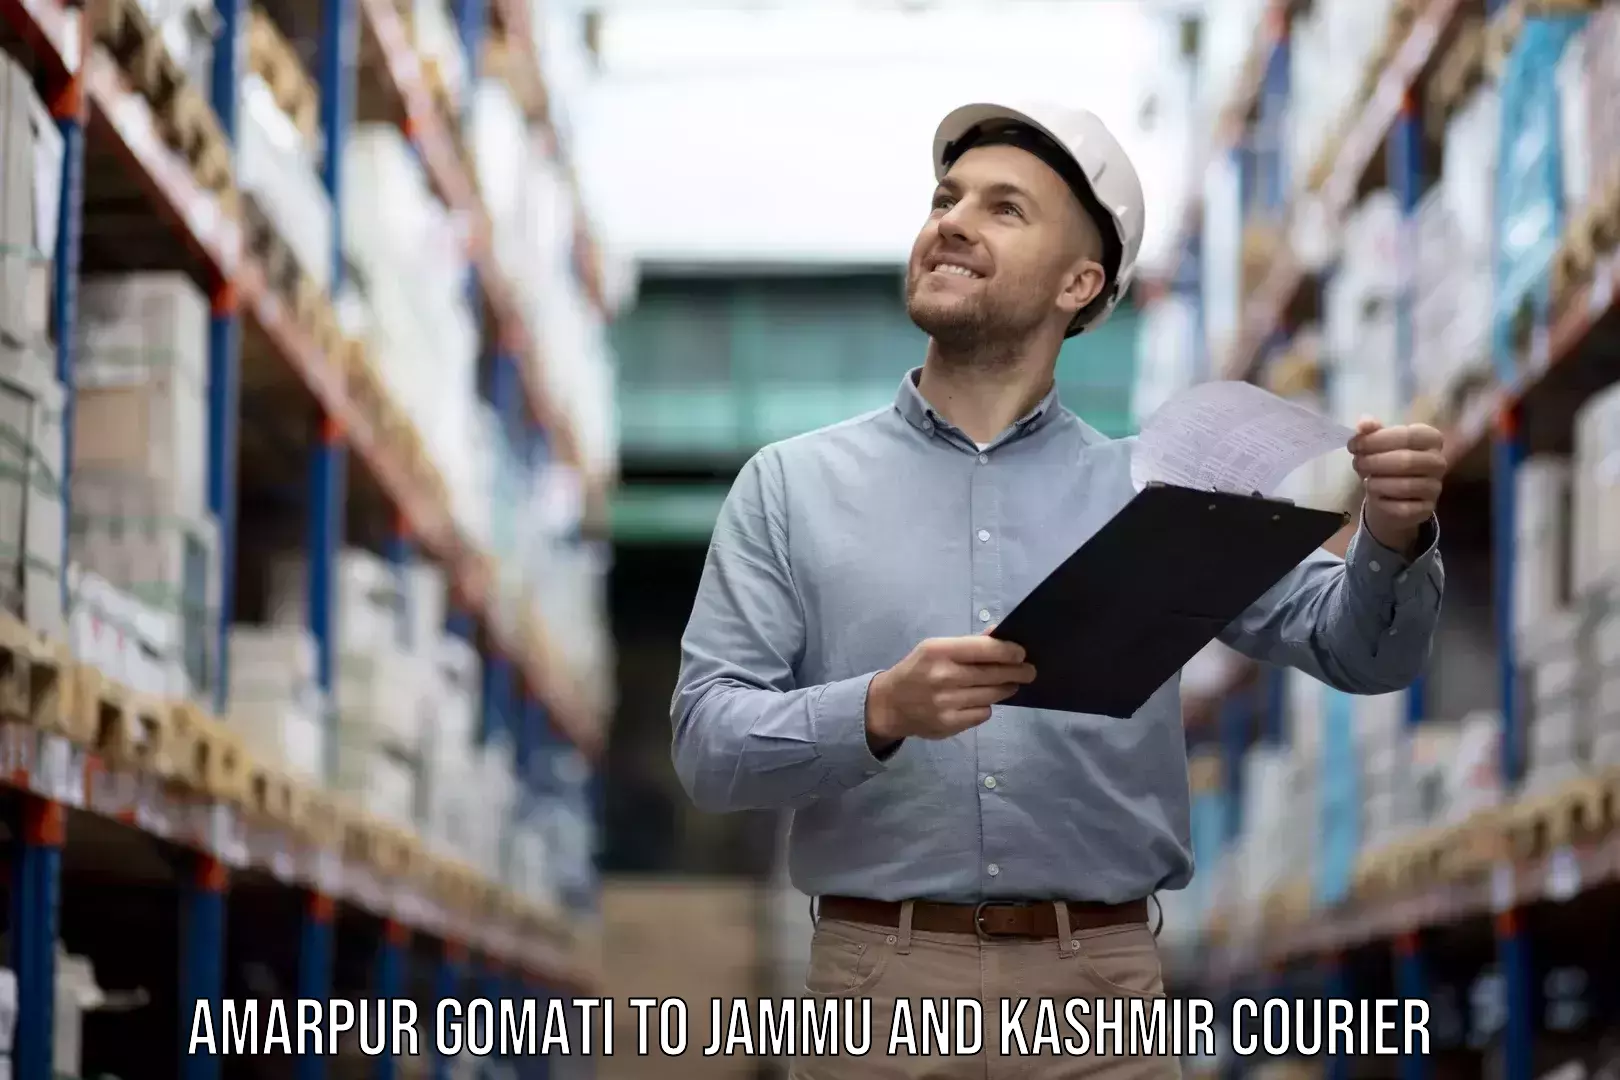 Long-distance moving services Amarpur Gomati to Poonch